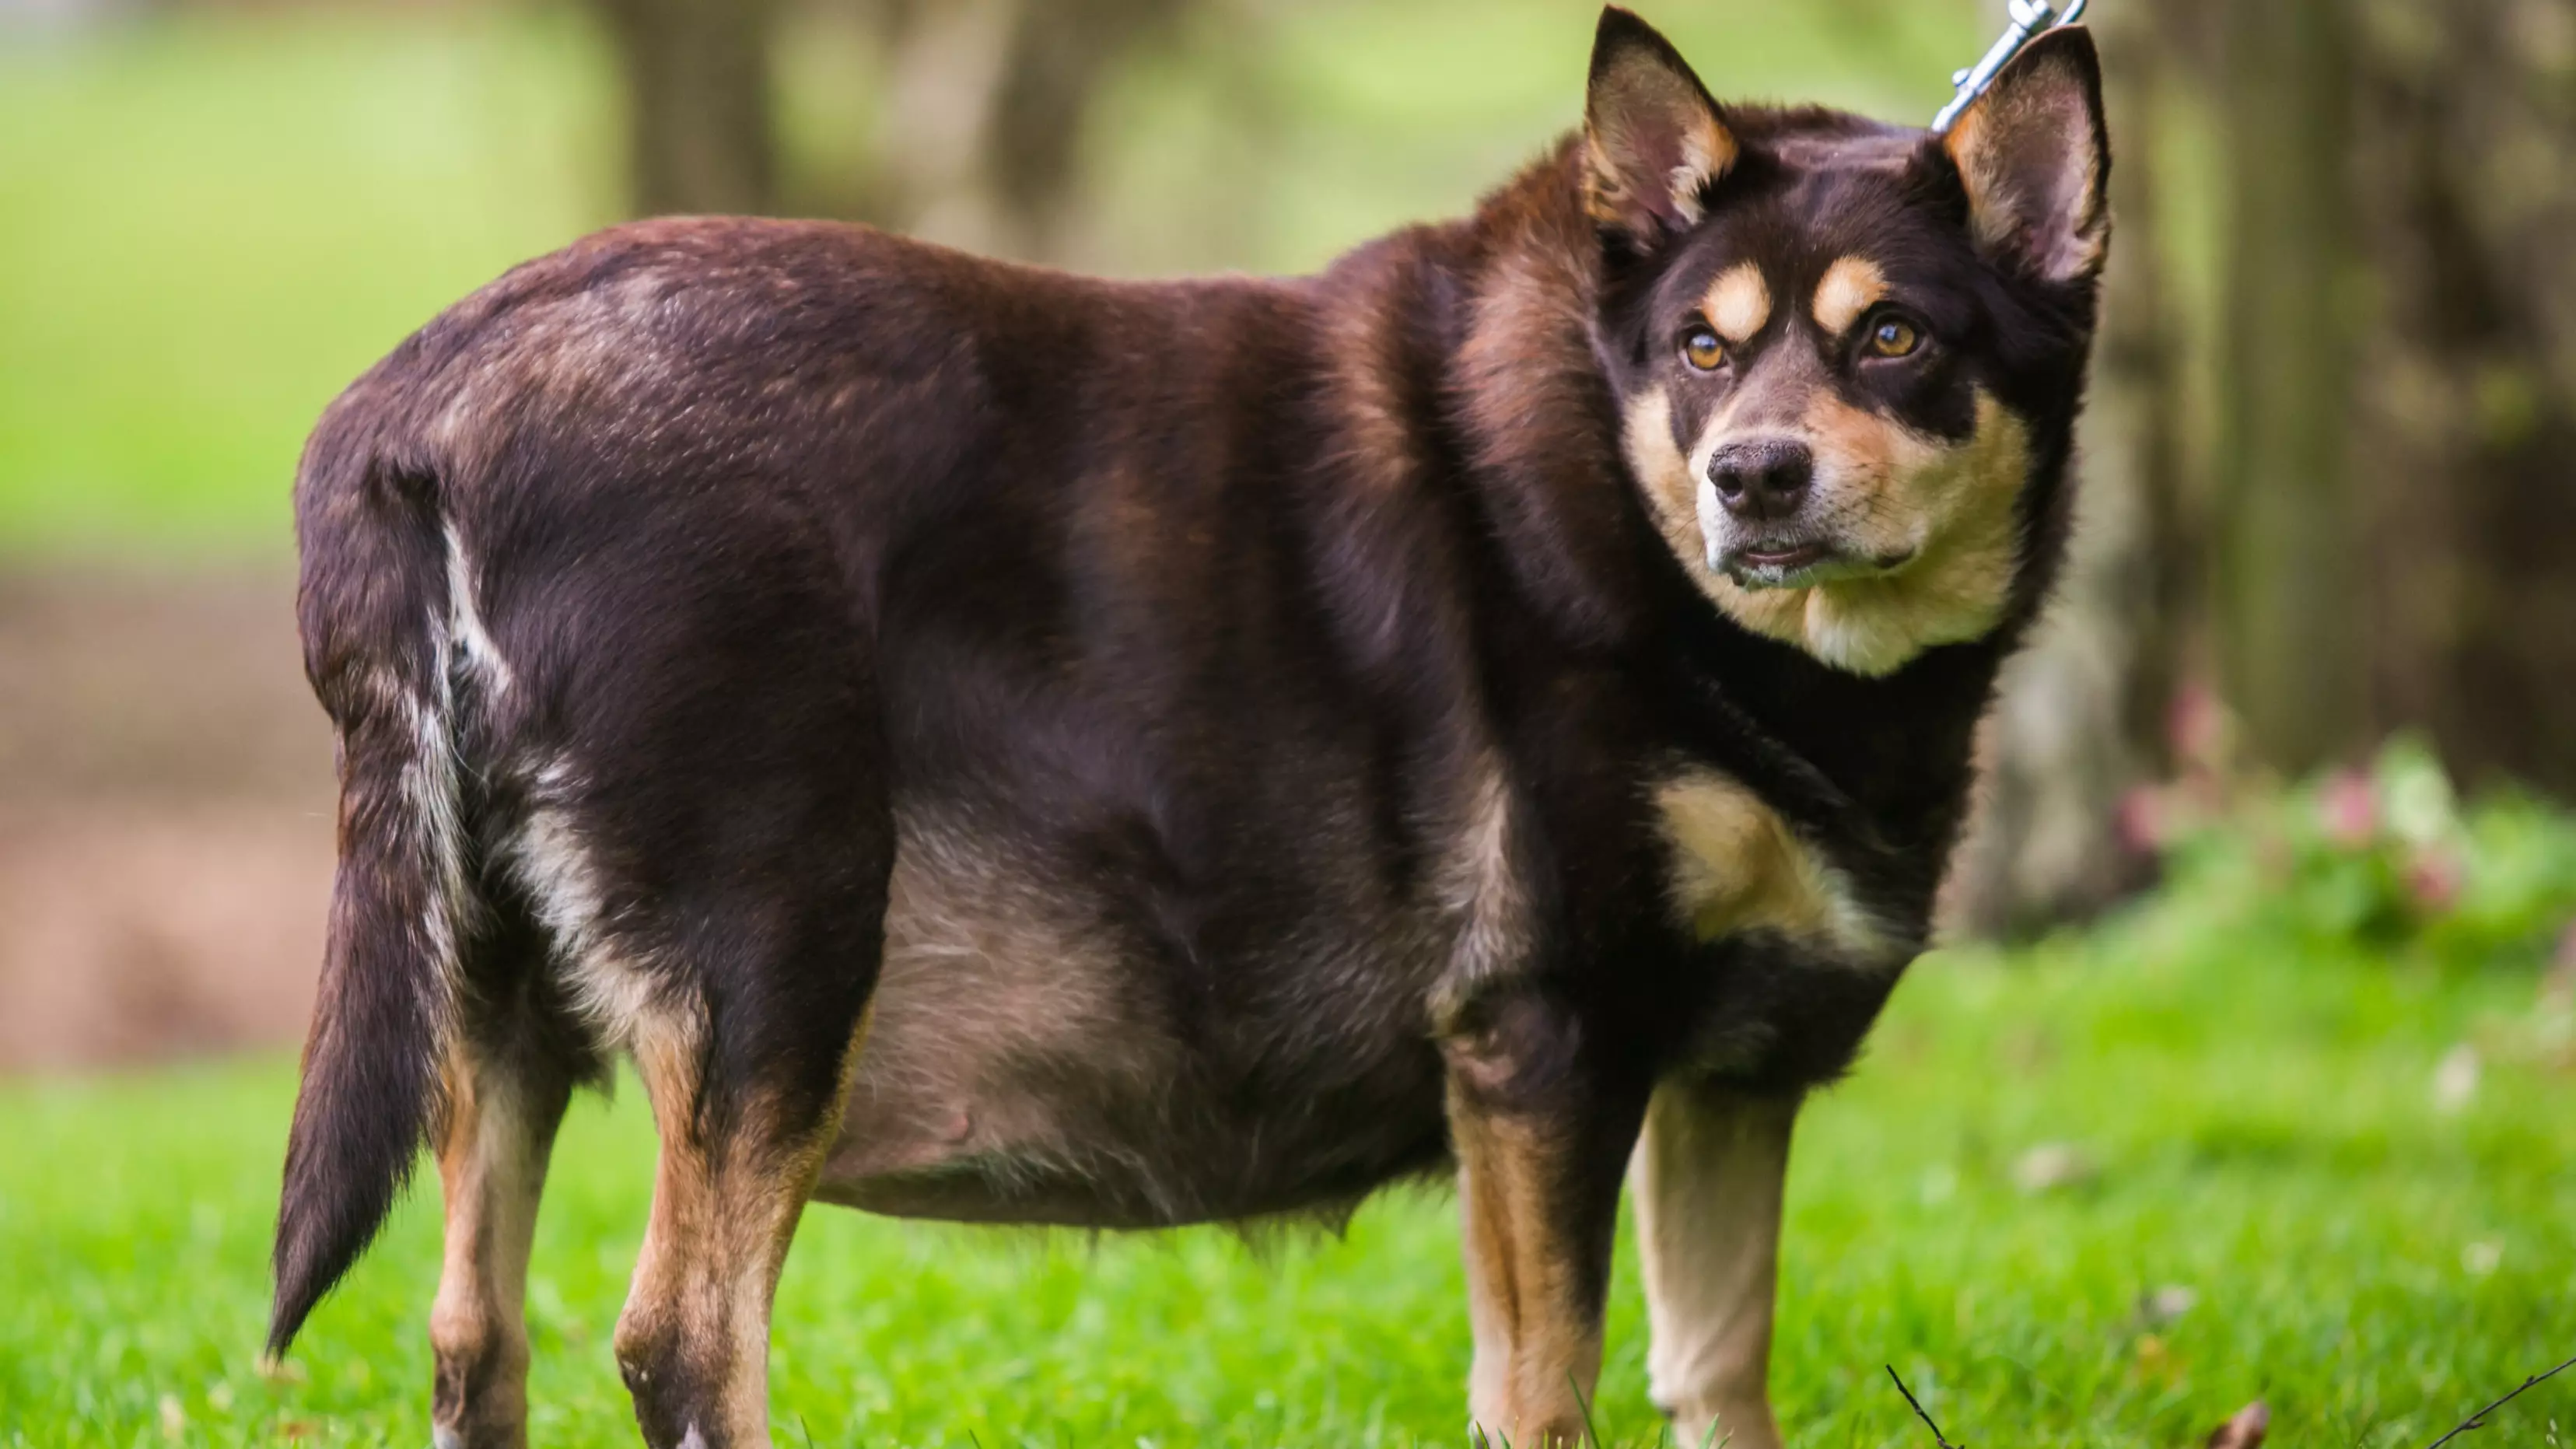 Britain's Fattest Dog Loses Half Her Body Weight